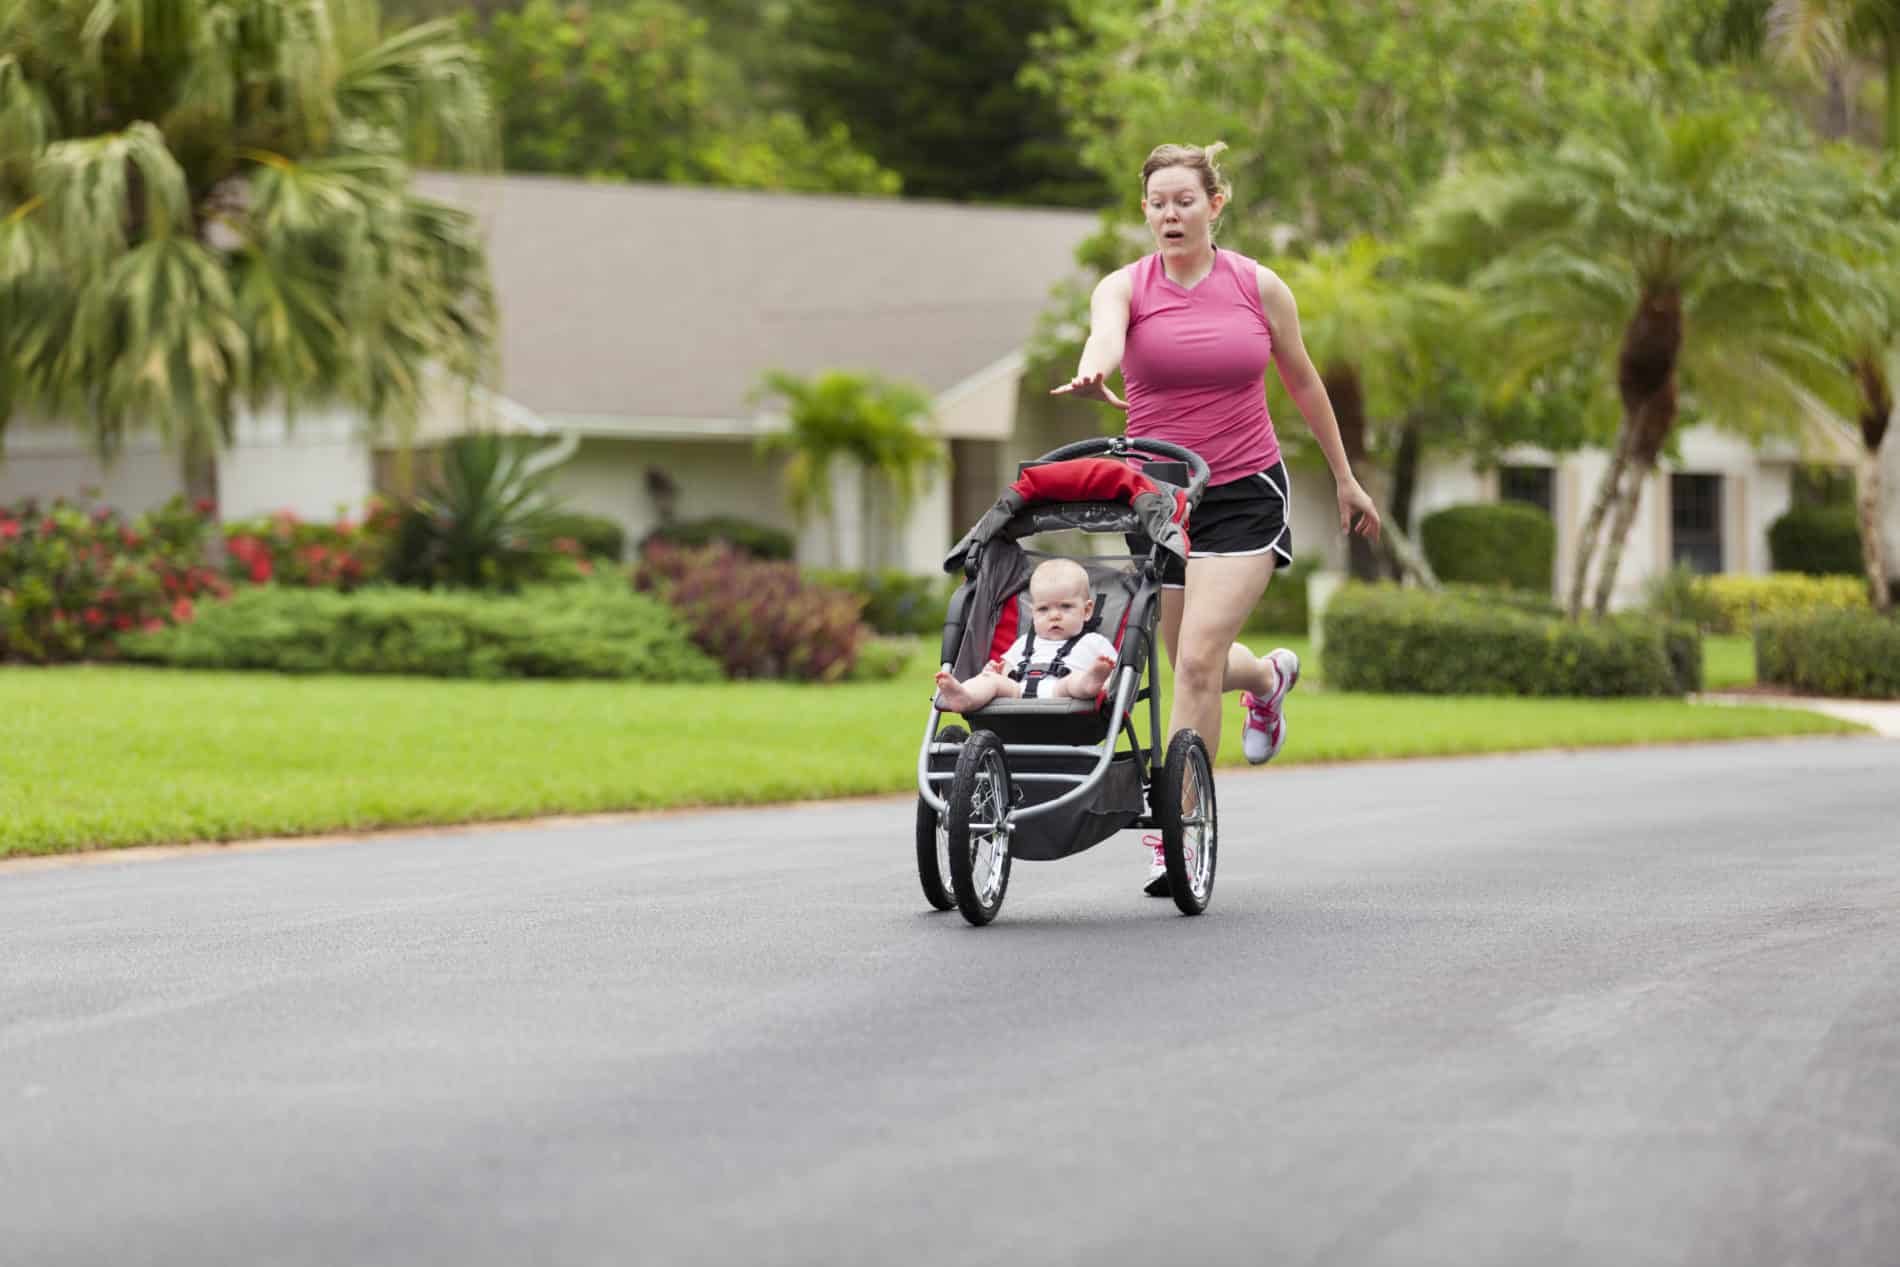 A worried woman running behind a baby's stroller on the street reaches for the stroller's handlebars